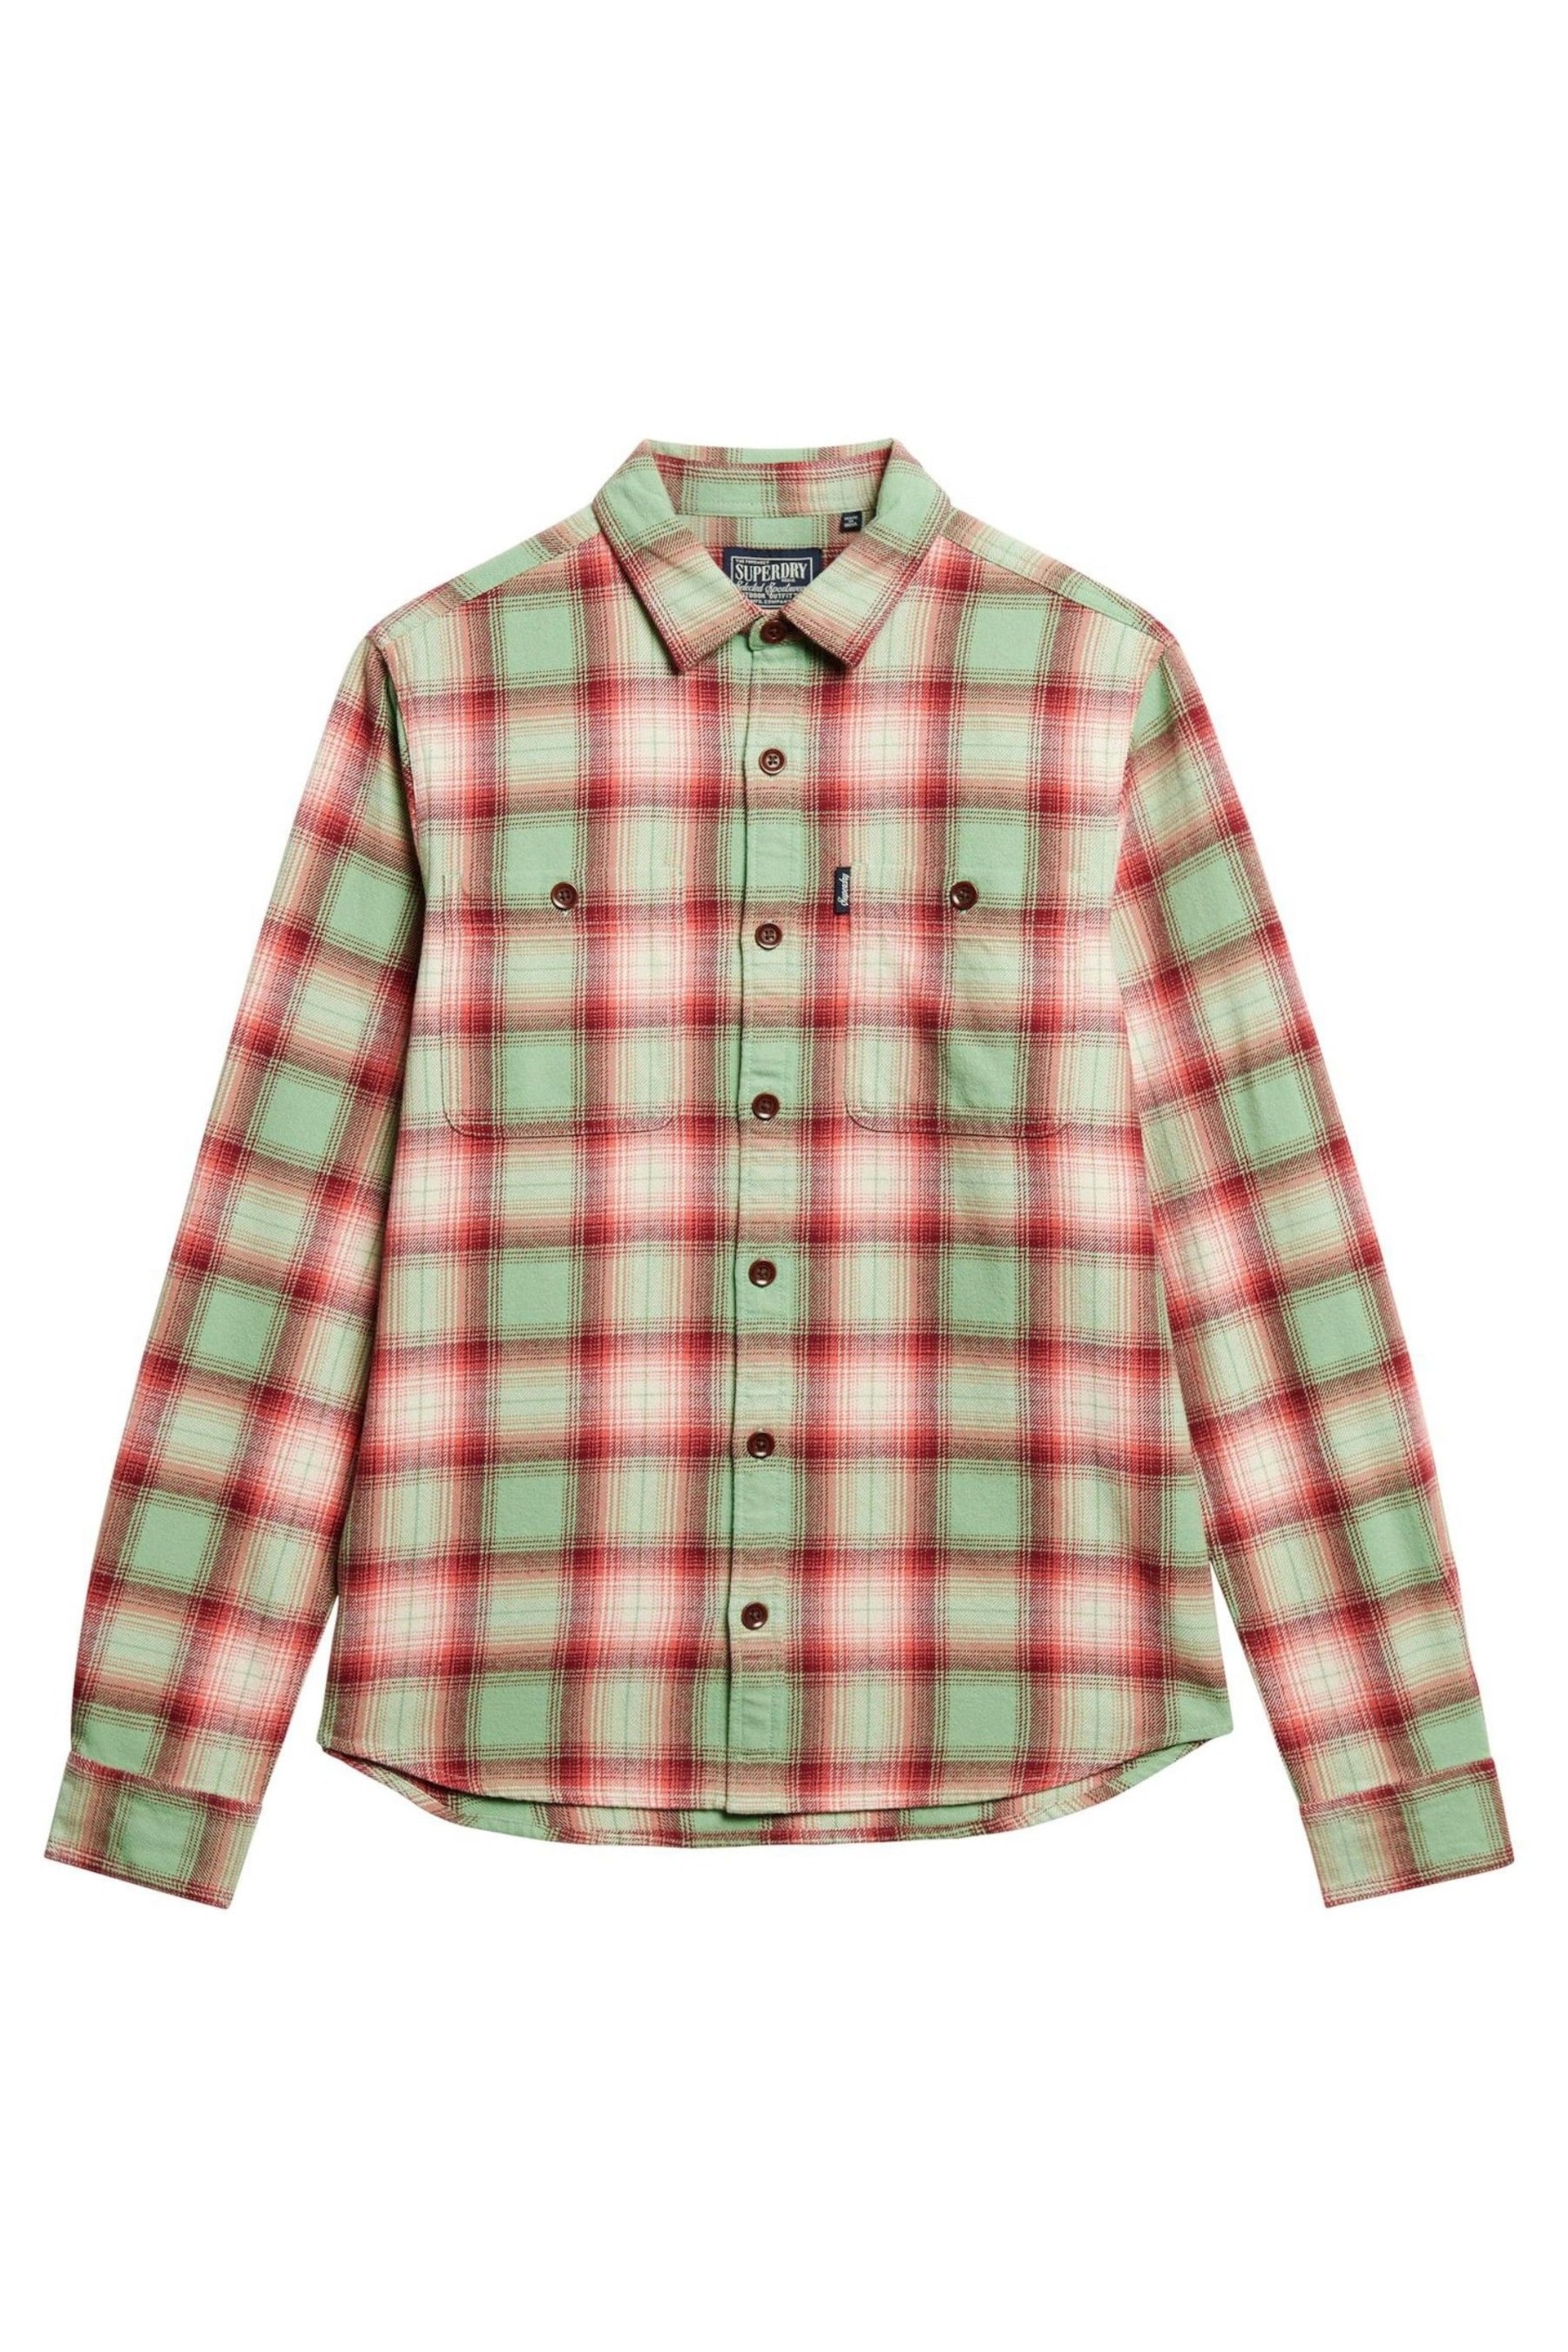 Superdry Green Vintage Check Overshirt - Image 4 of 6